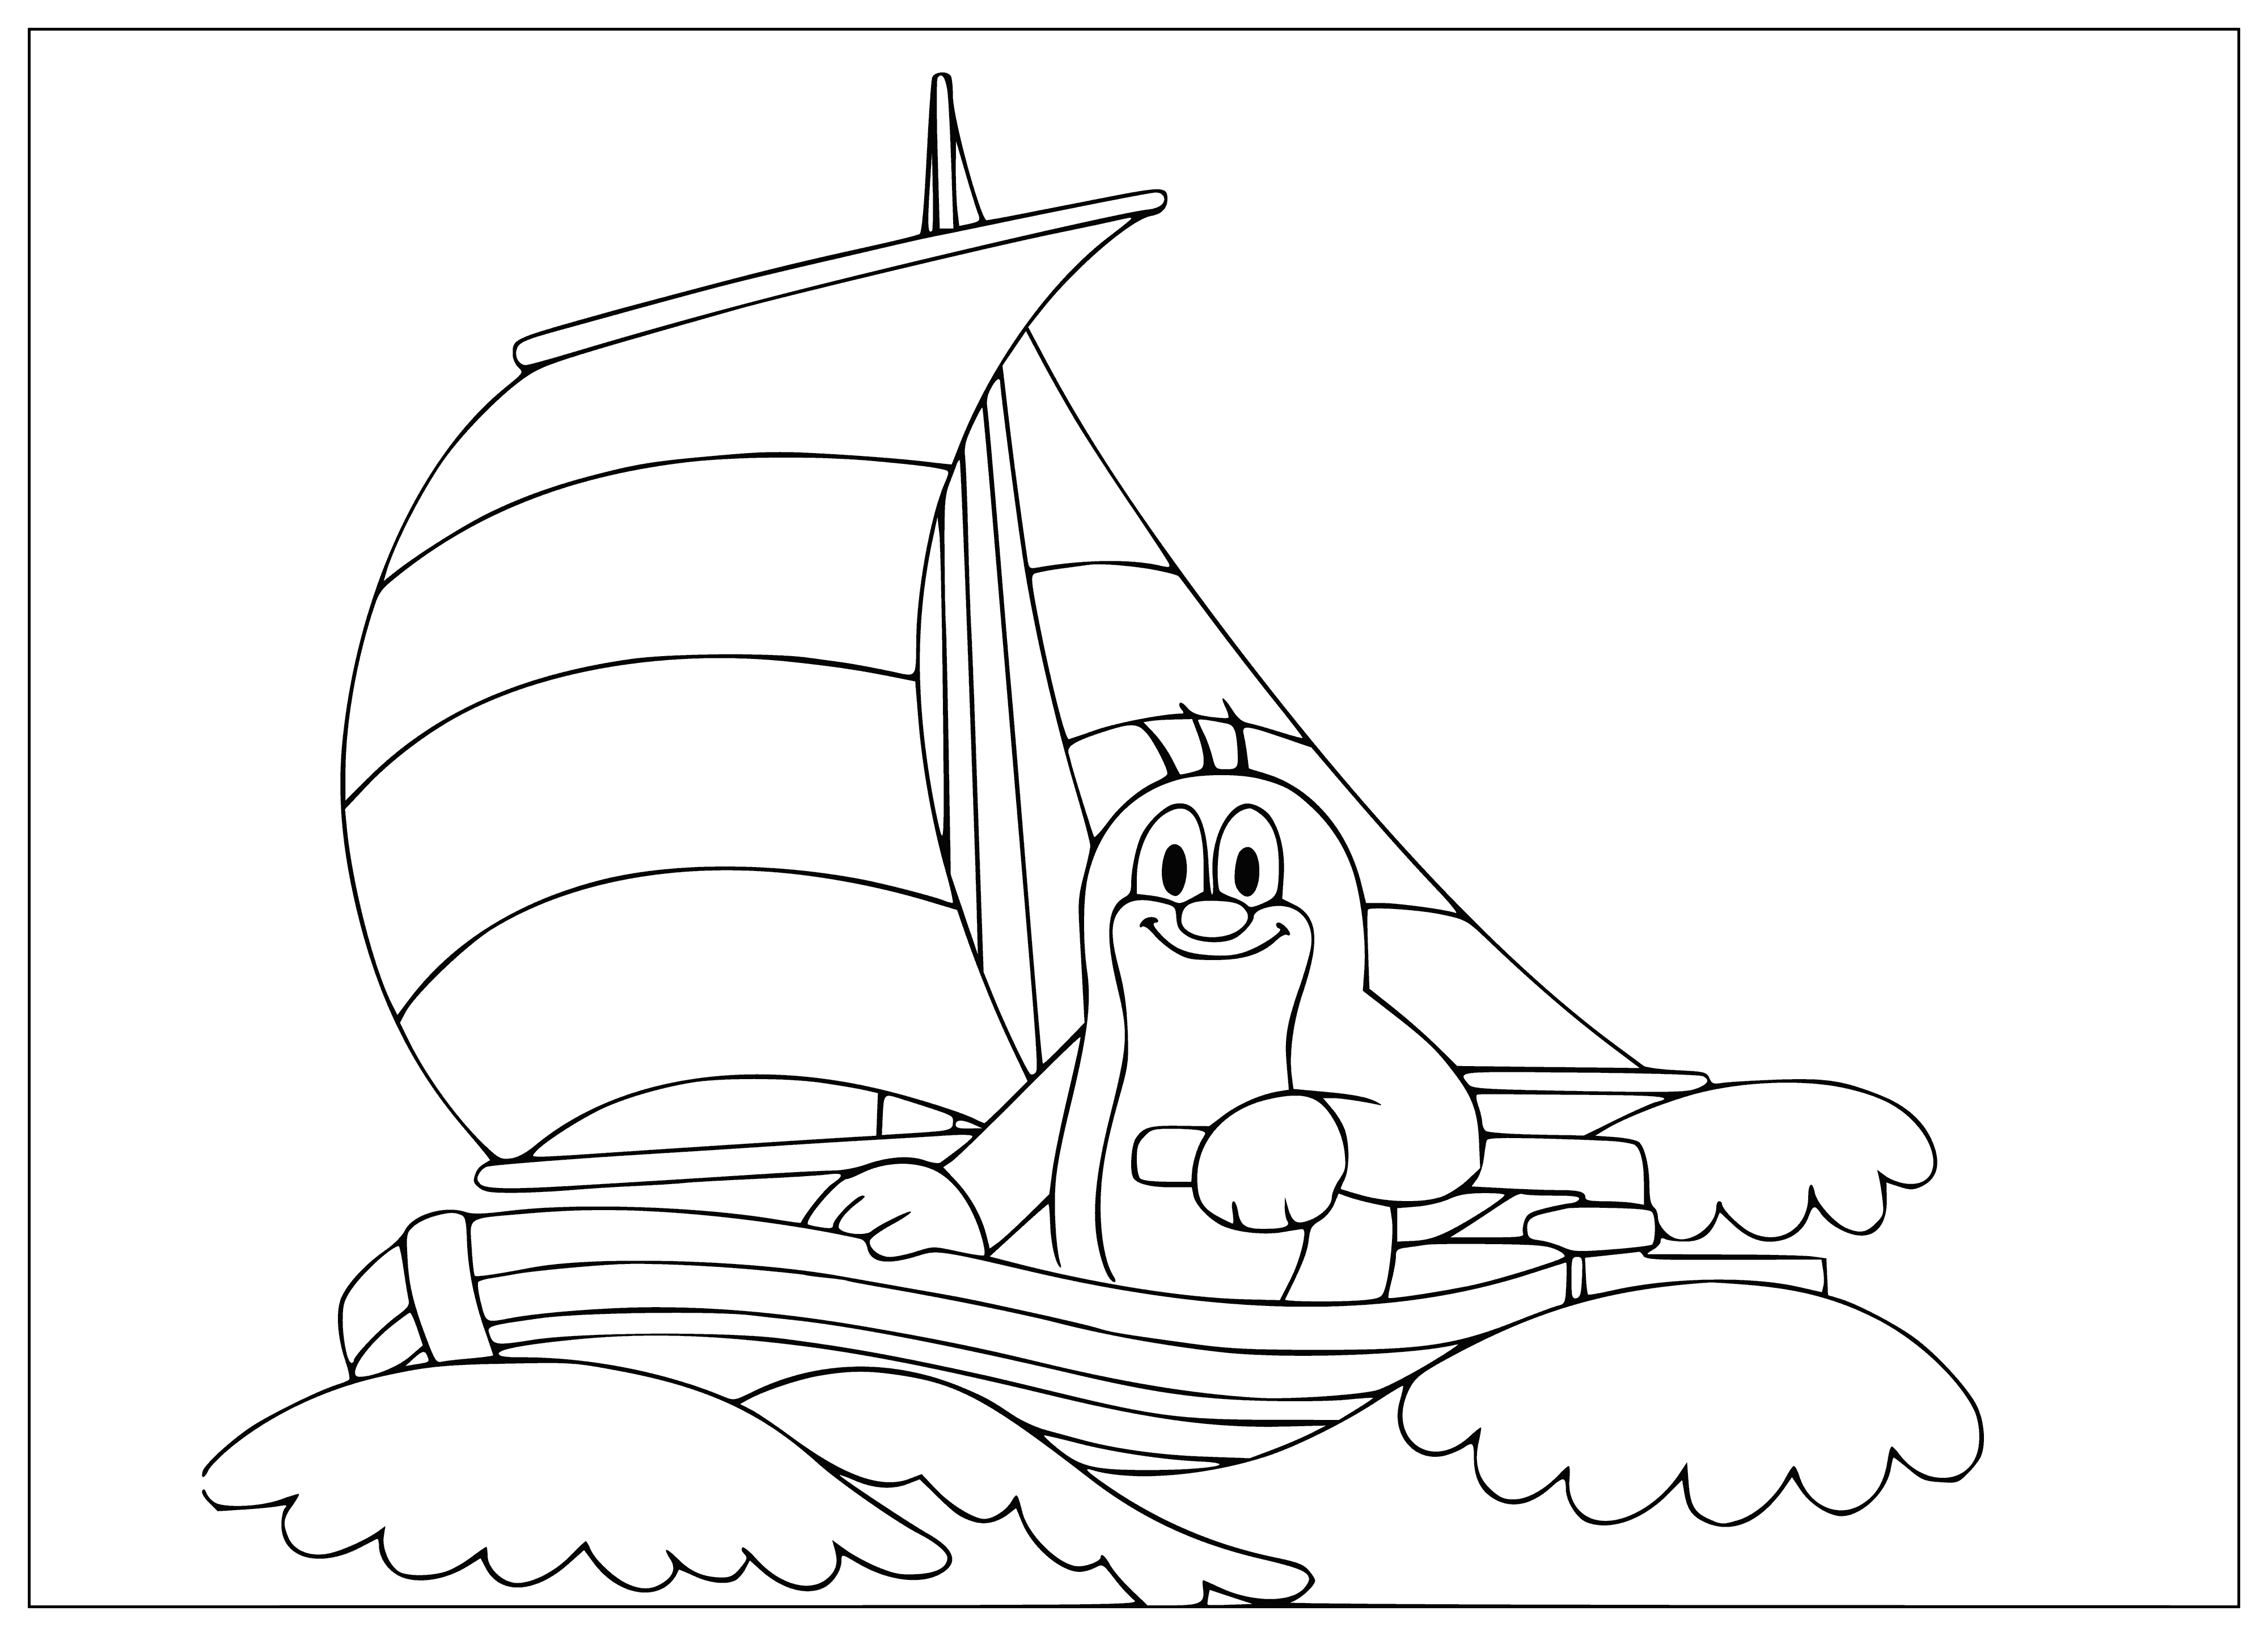 coloring page: Mole in green overalls and yellow hat paddles leaf-boat in shallow pool. Green meadow in background.